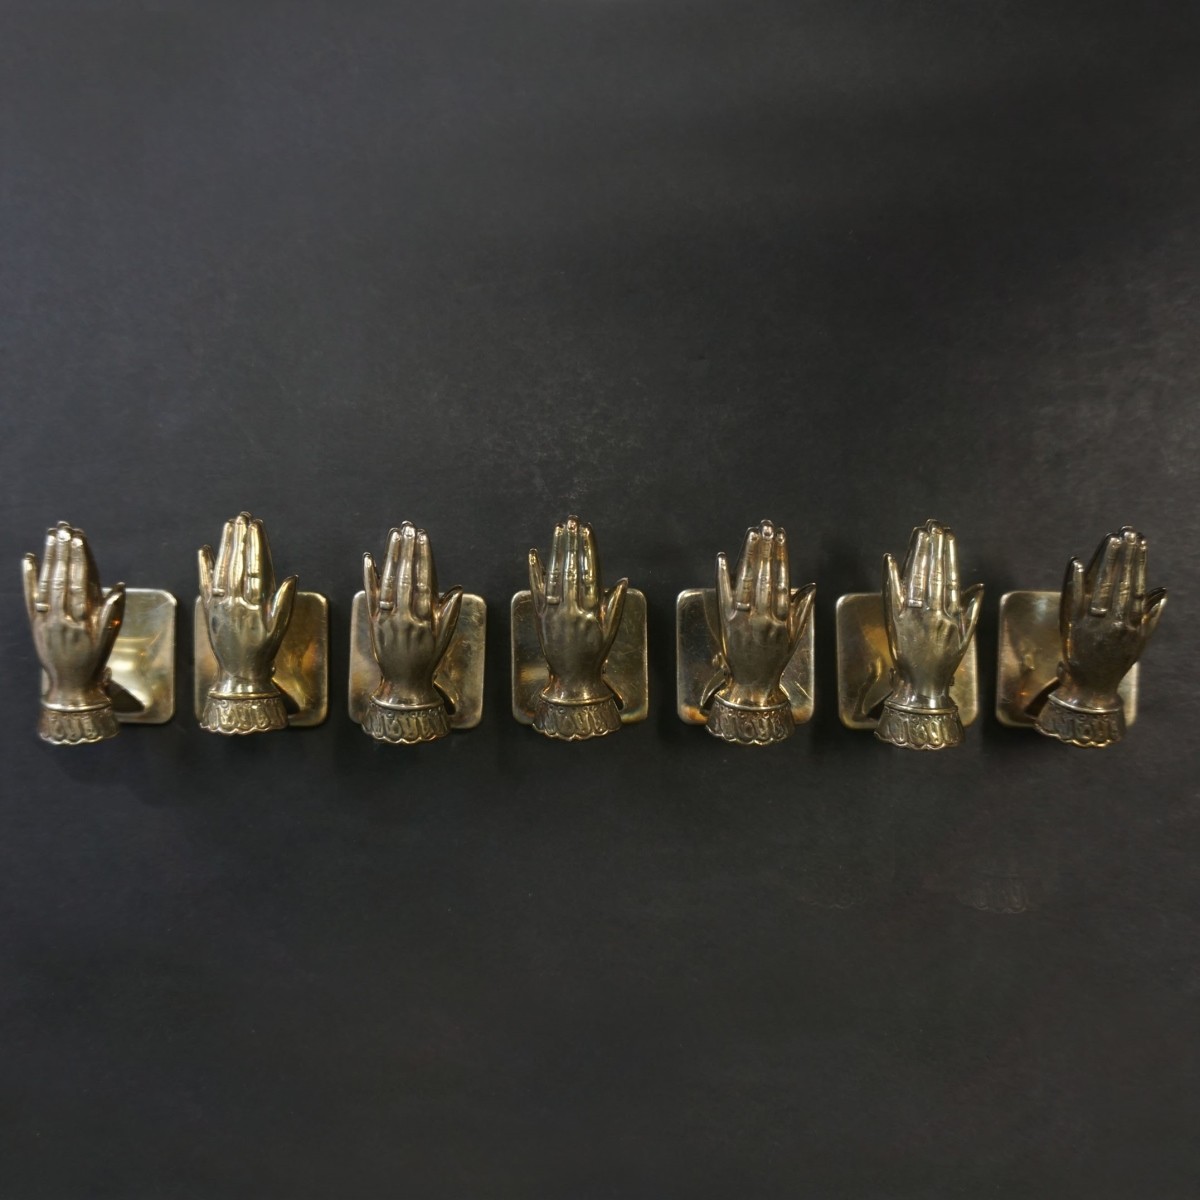 Japanese Silver Place Card Holders